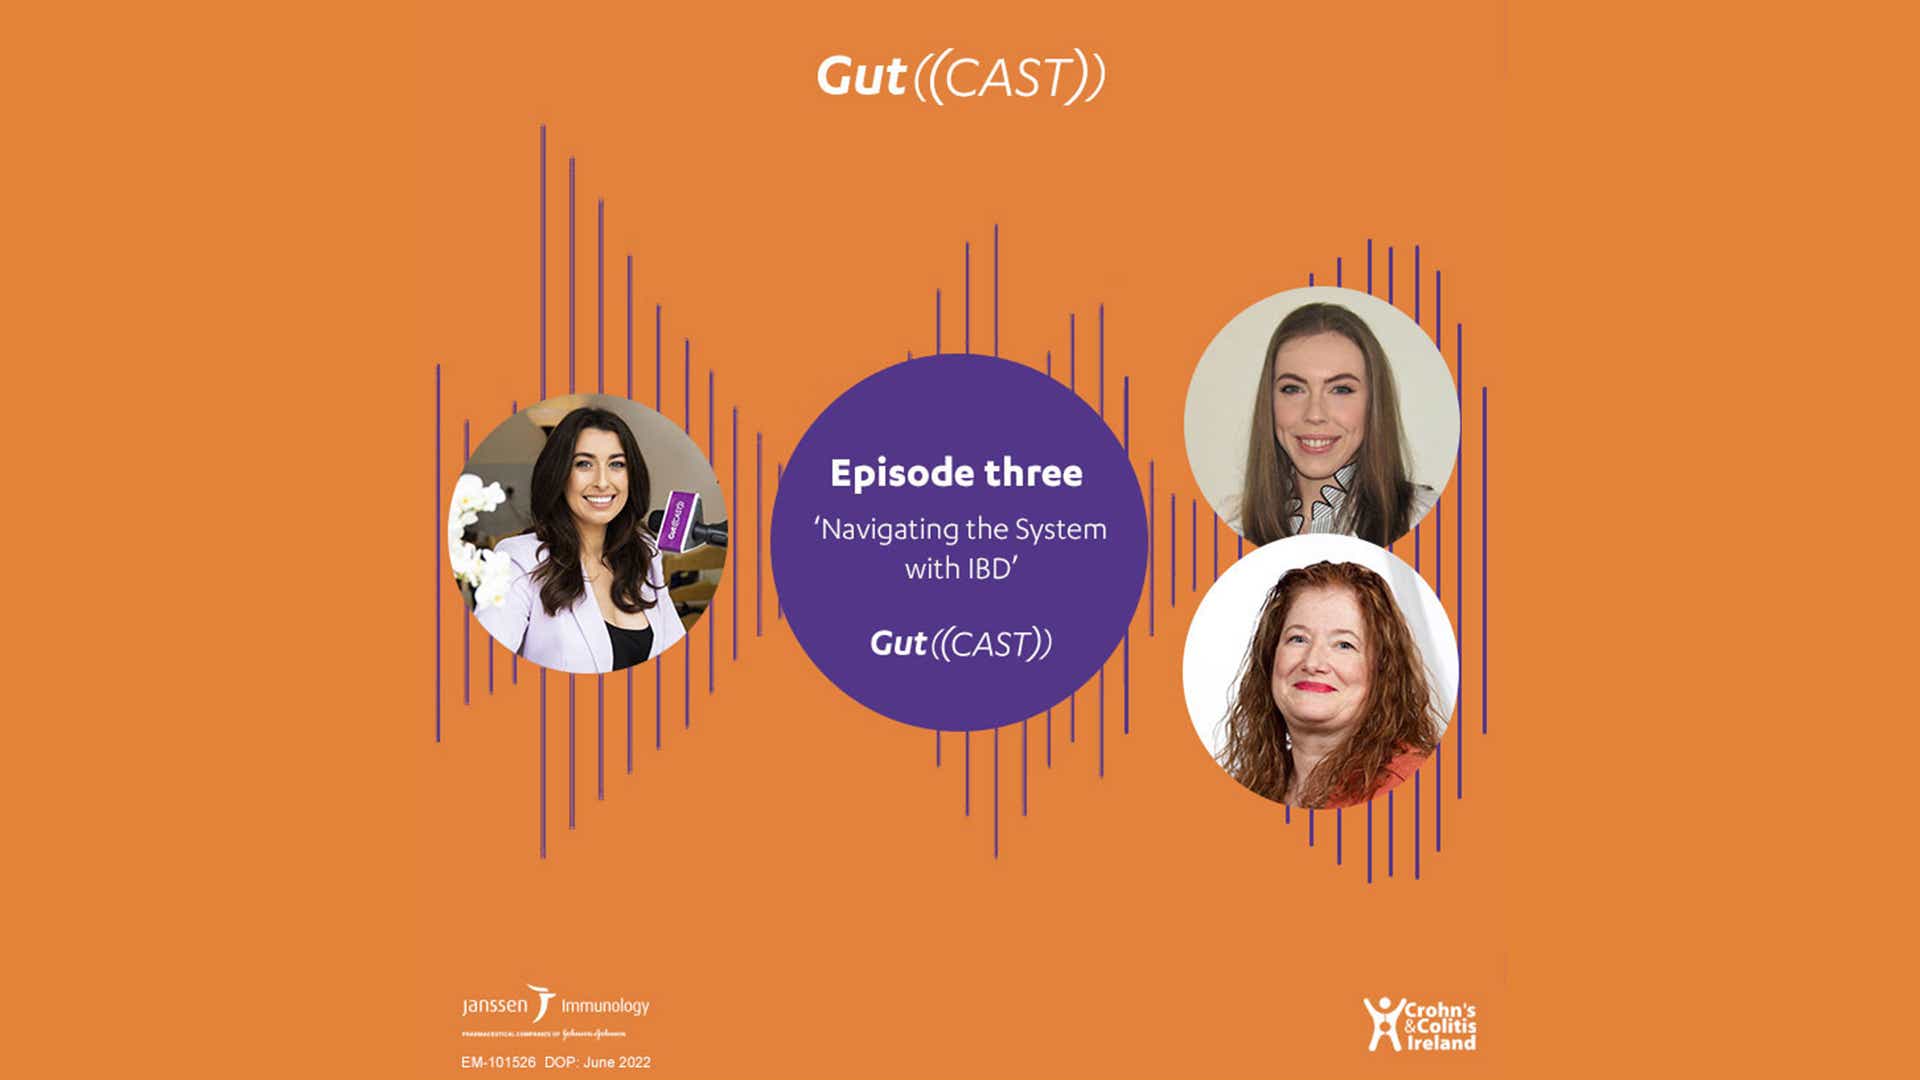 Season three episode three of the podcast series Gutcast named "Navigating the System with IBD"